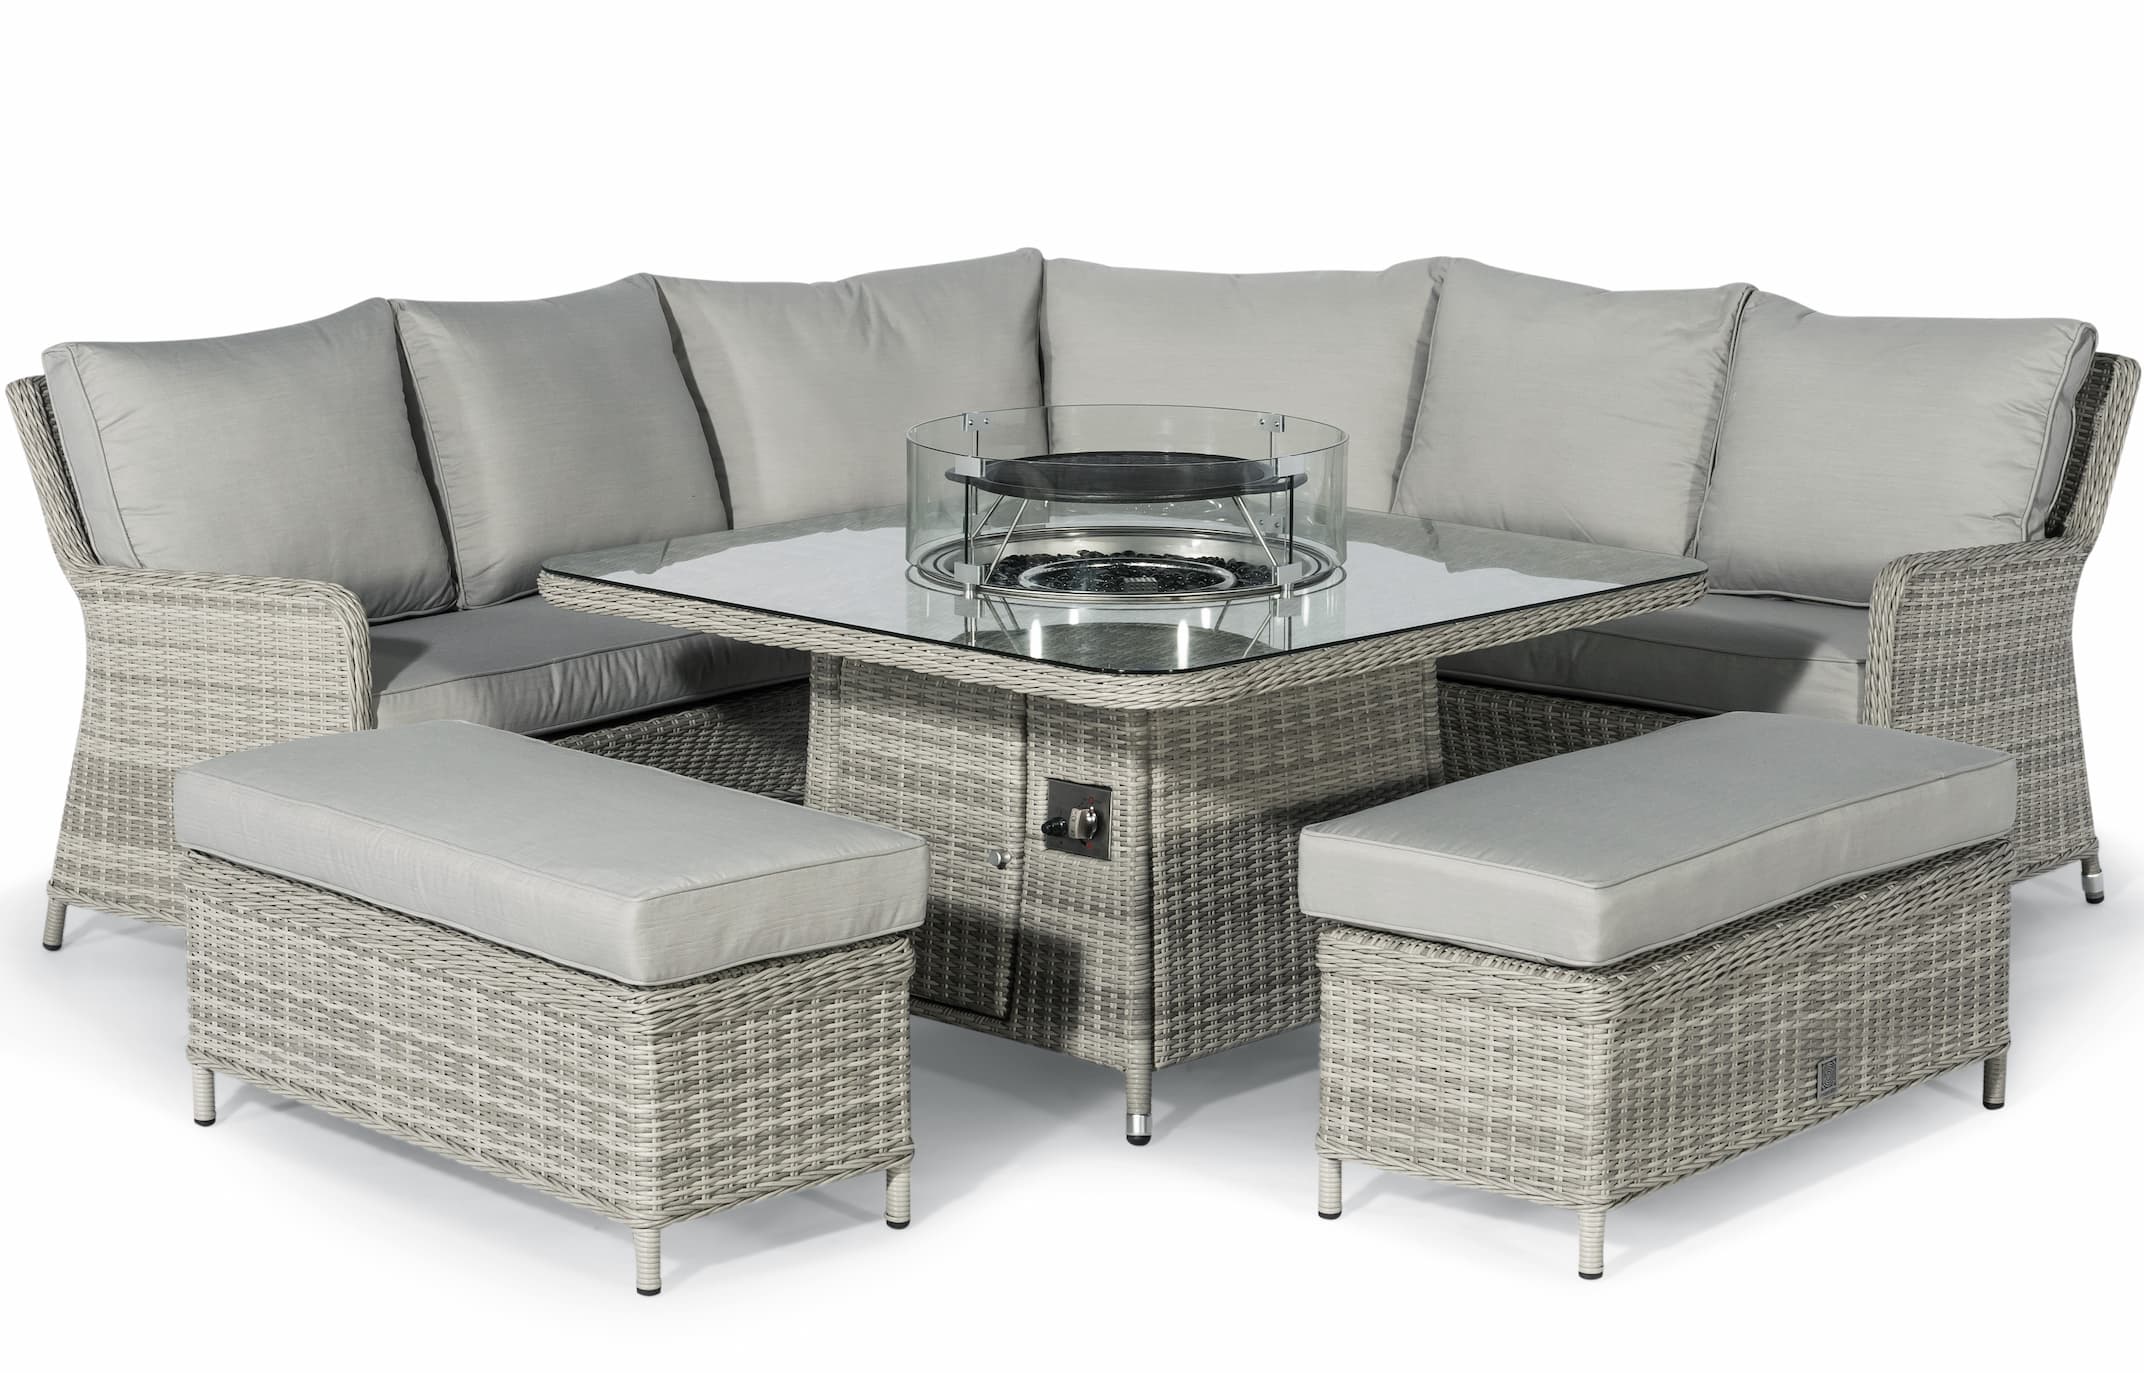 Royal Corner Garden Furniture Set With, Circular Outdoor Furniture With Fire Pit